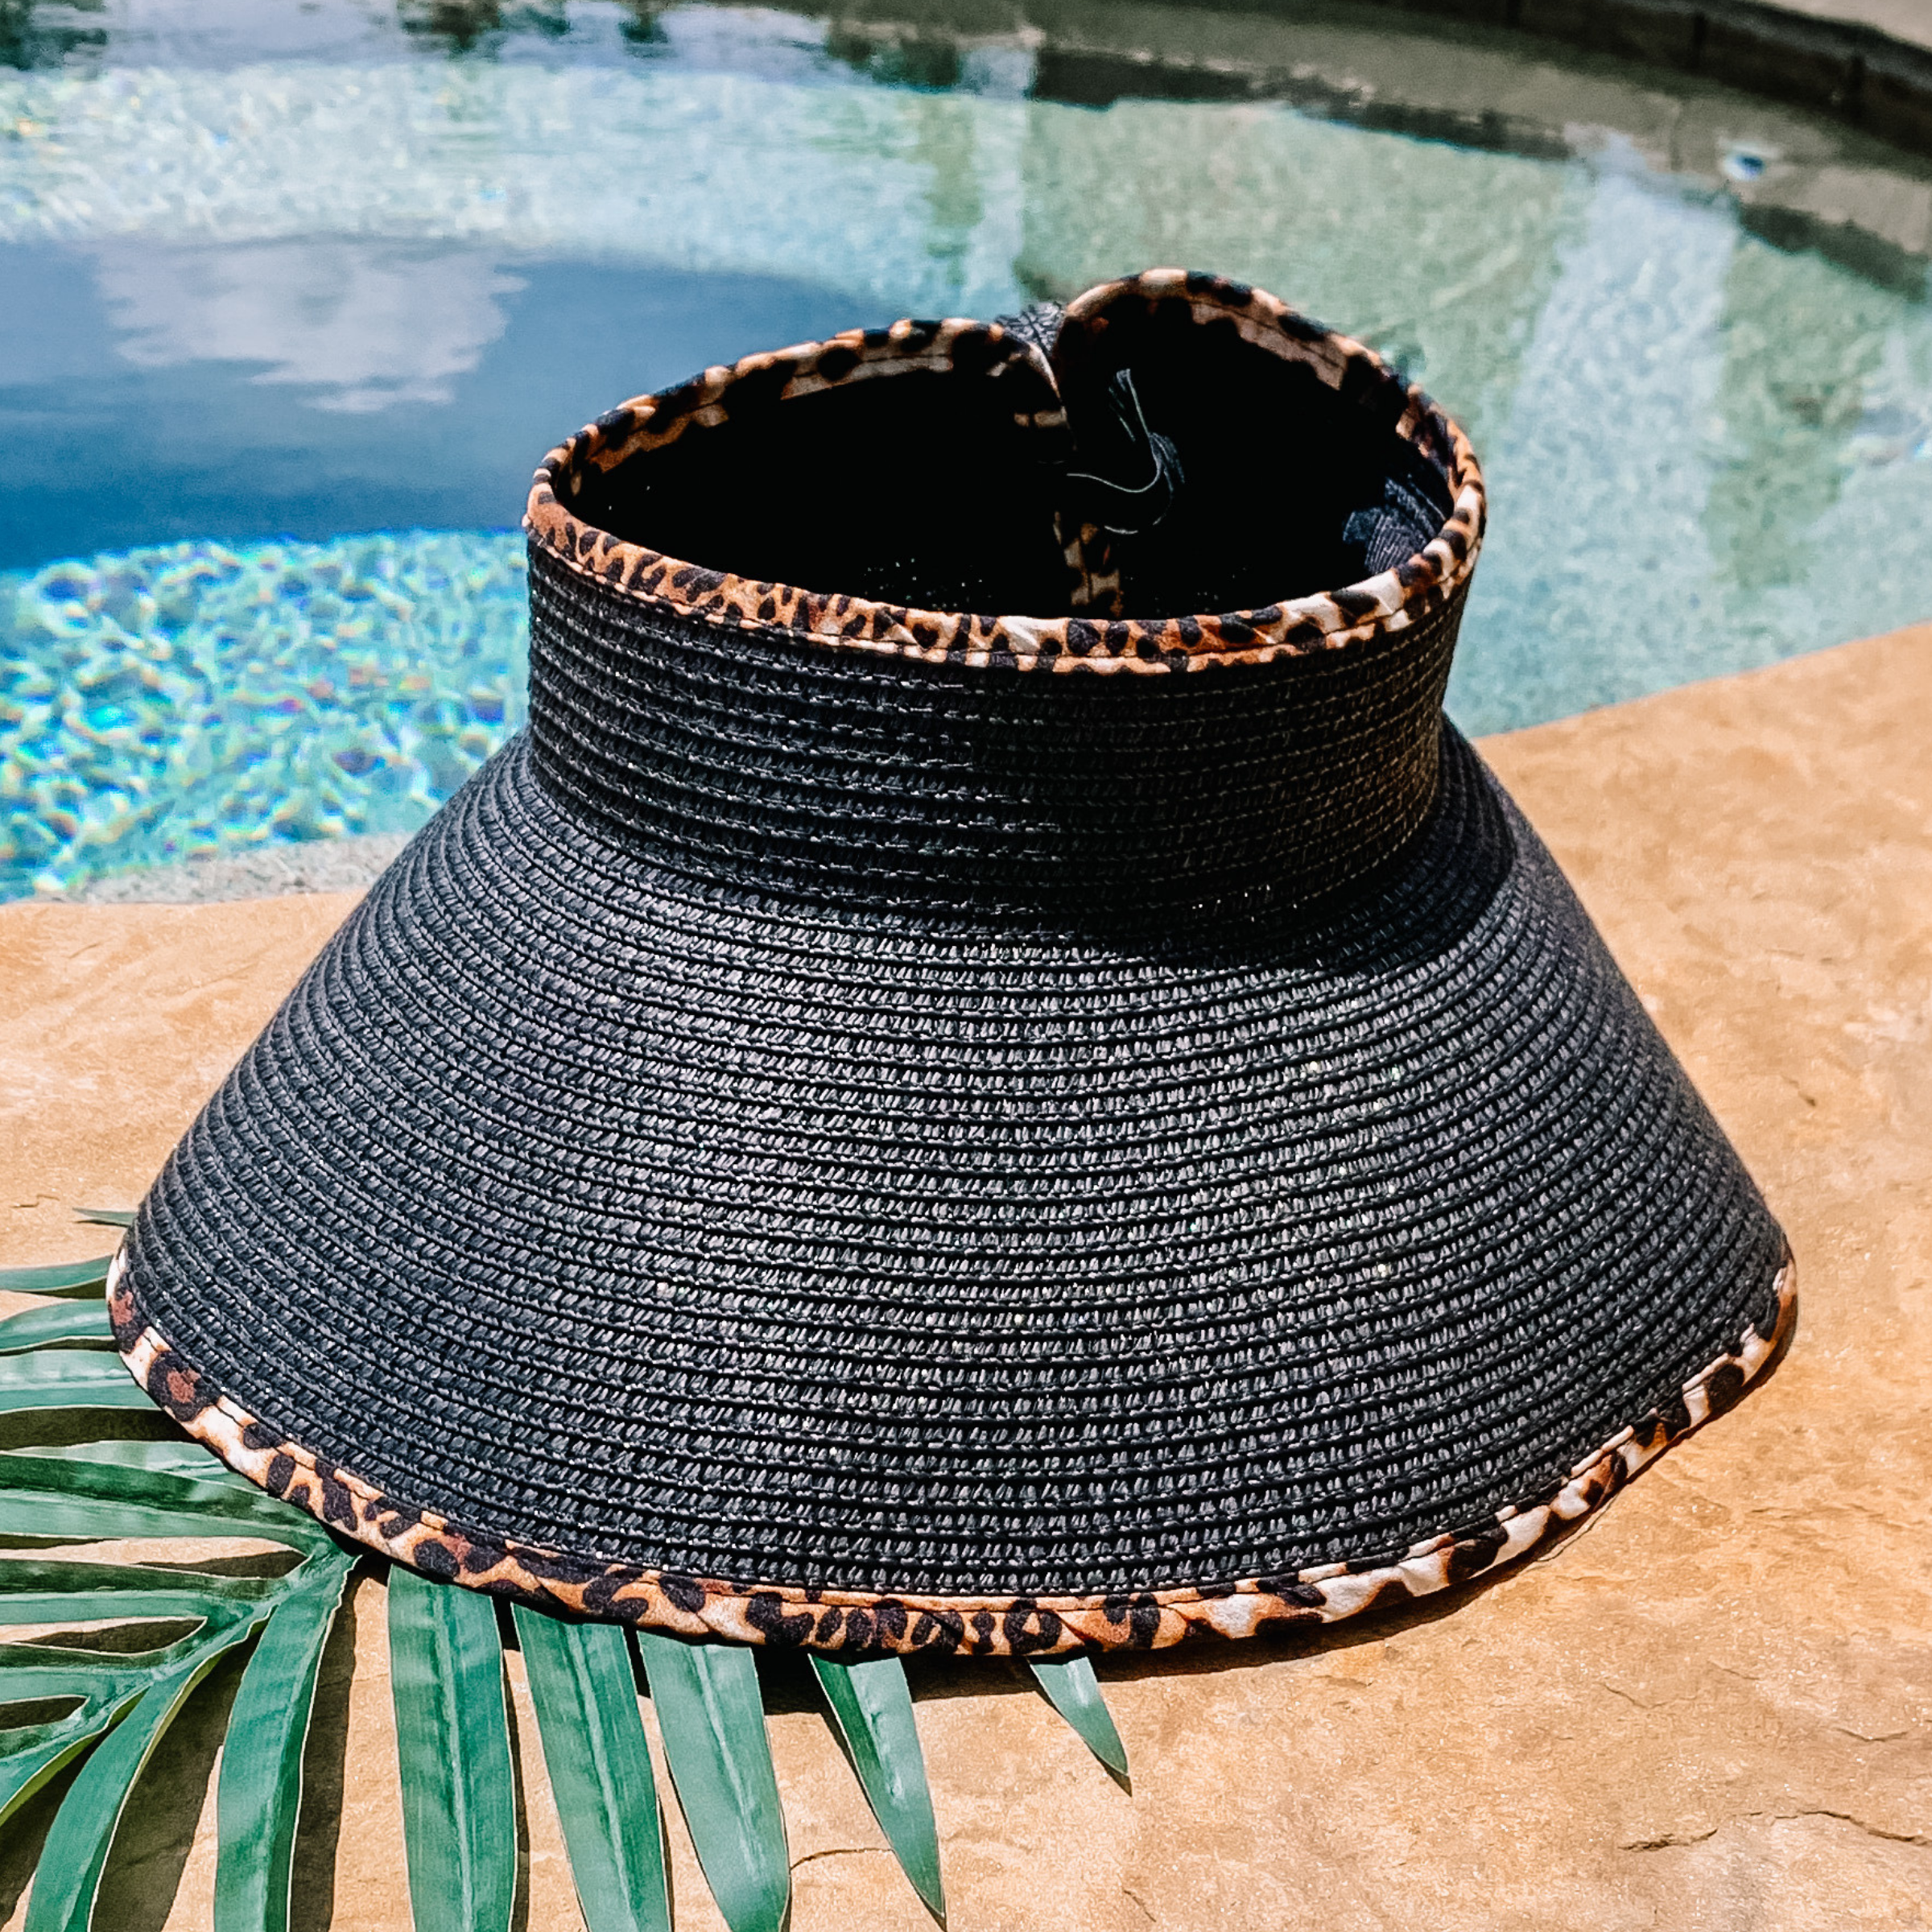 Black, woven velcro visor with leopard print trim that is pictured with a green leaf under it. This visor is pictured on a a tan rock in front of a pool.